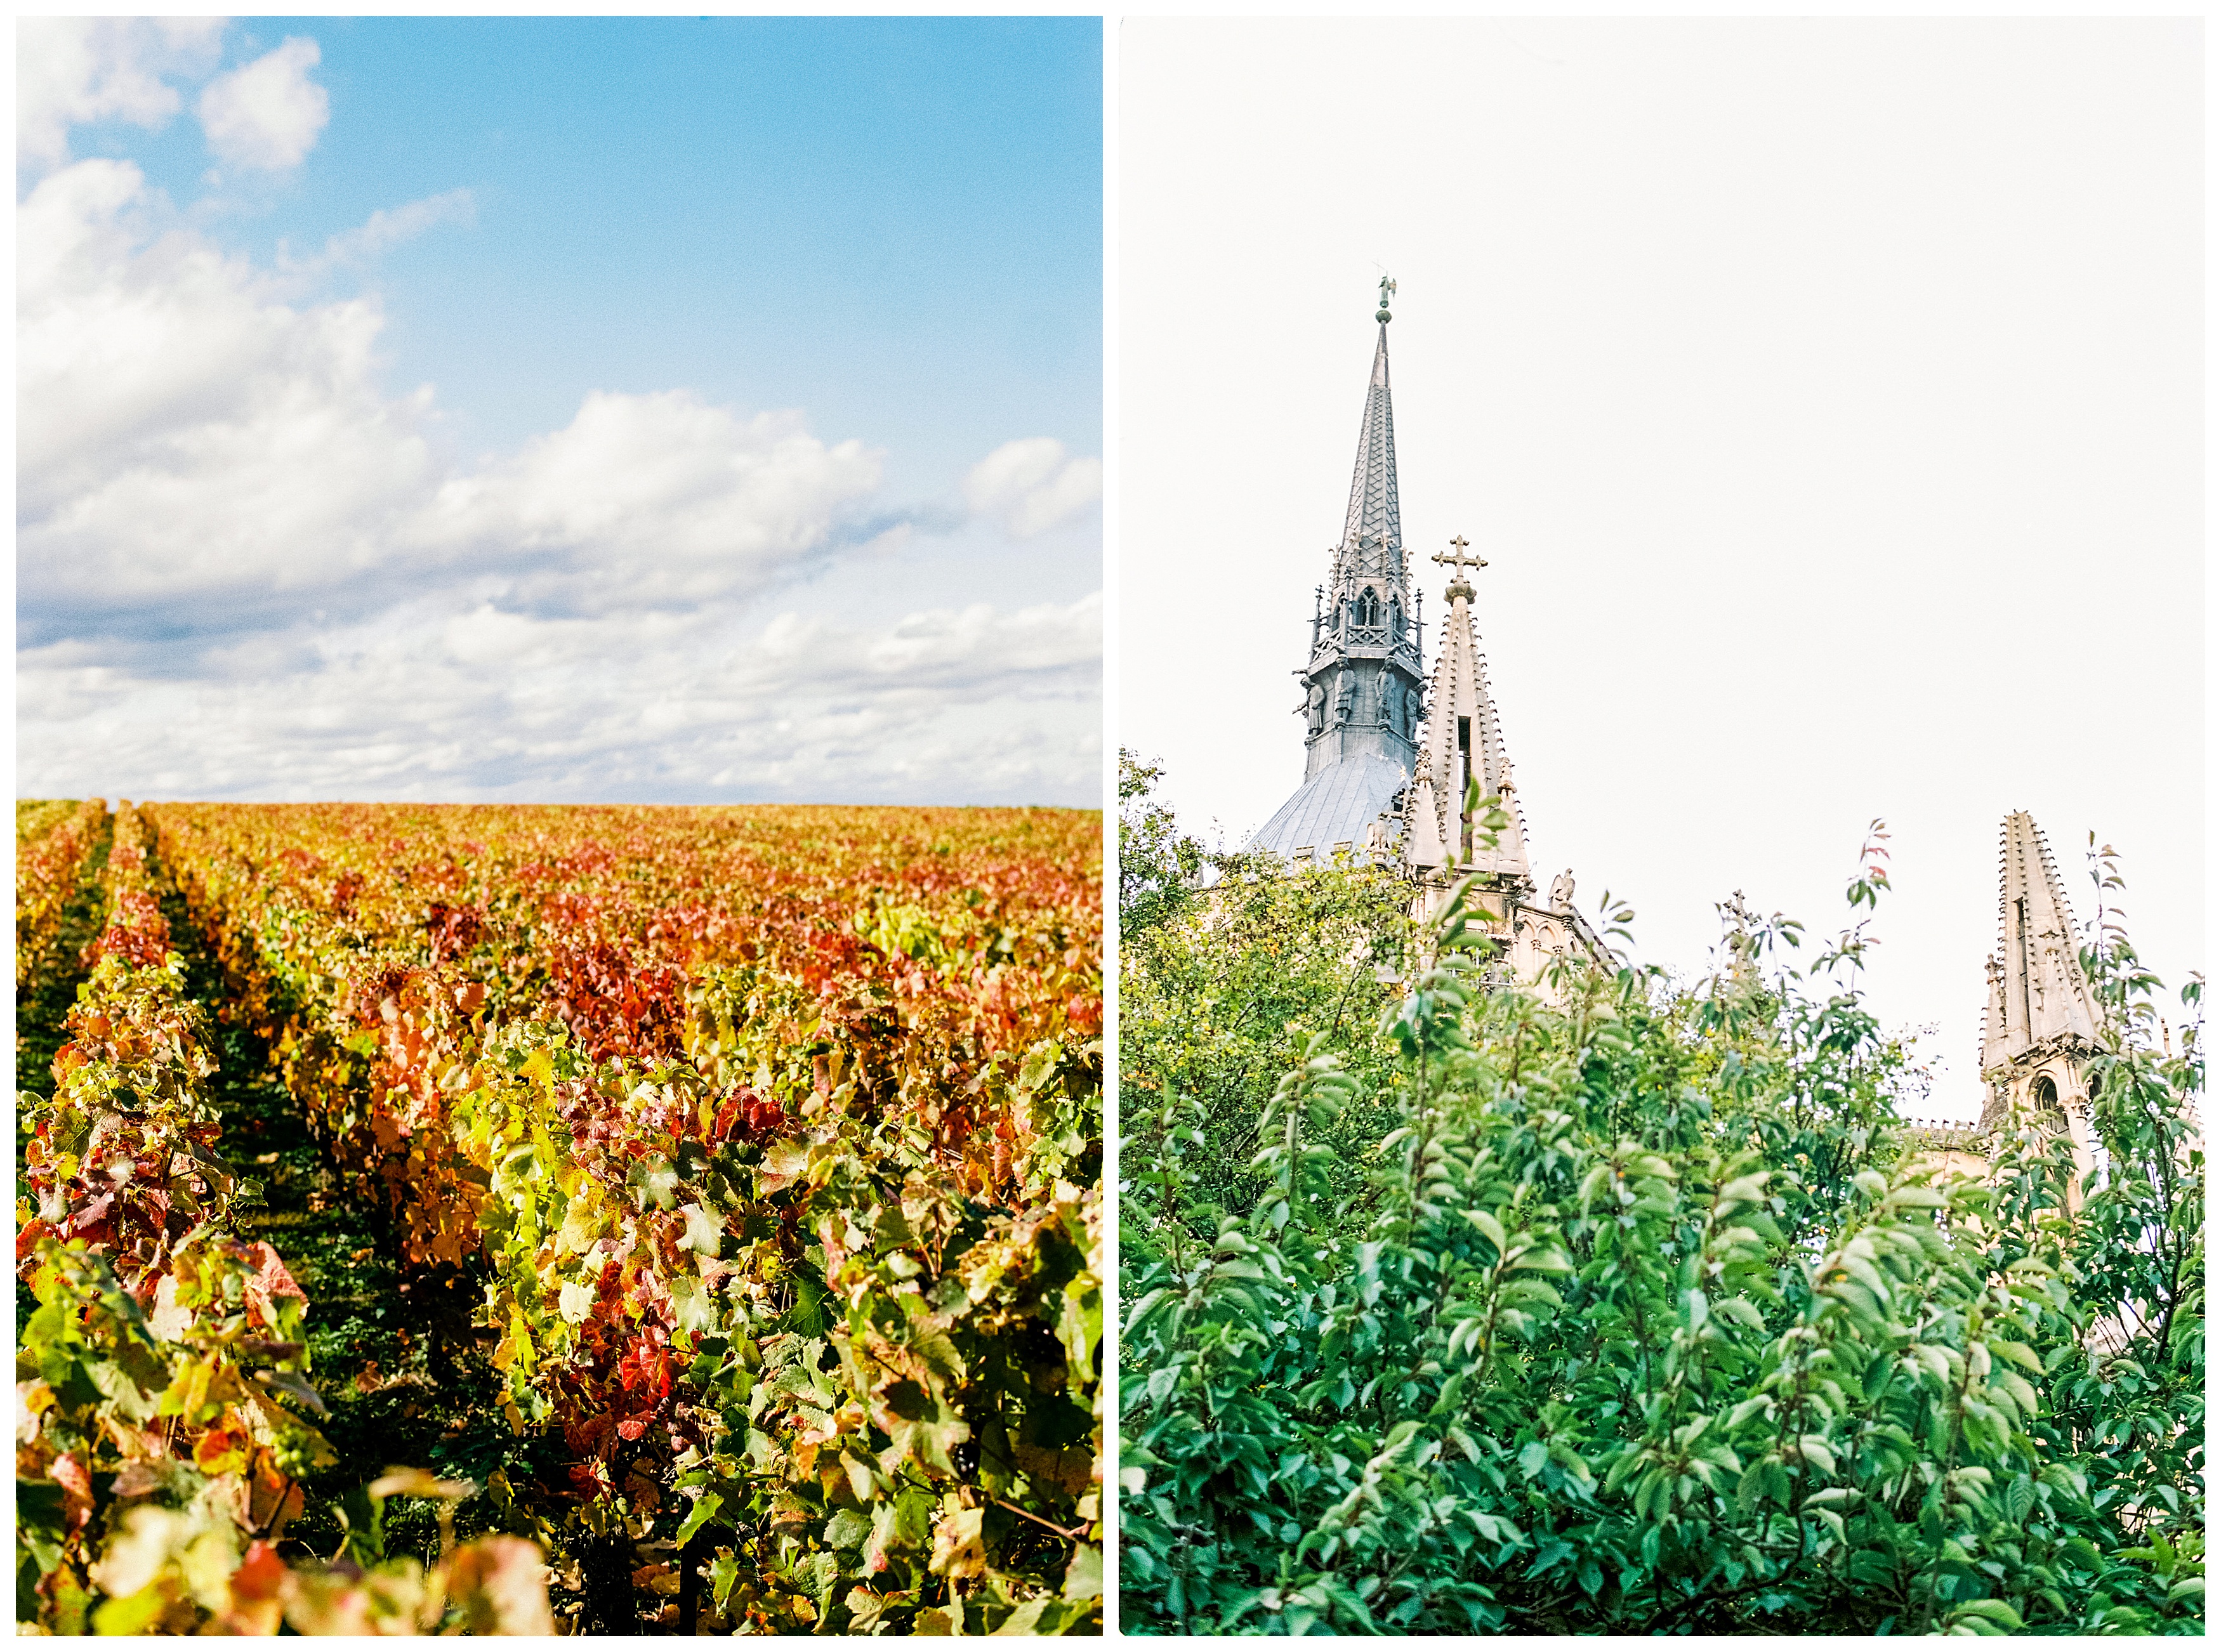 left: rows of vines in champagne right: the spires of the reims cathedral in france peeks above the trees